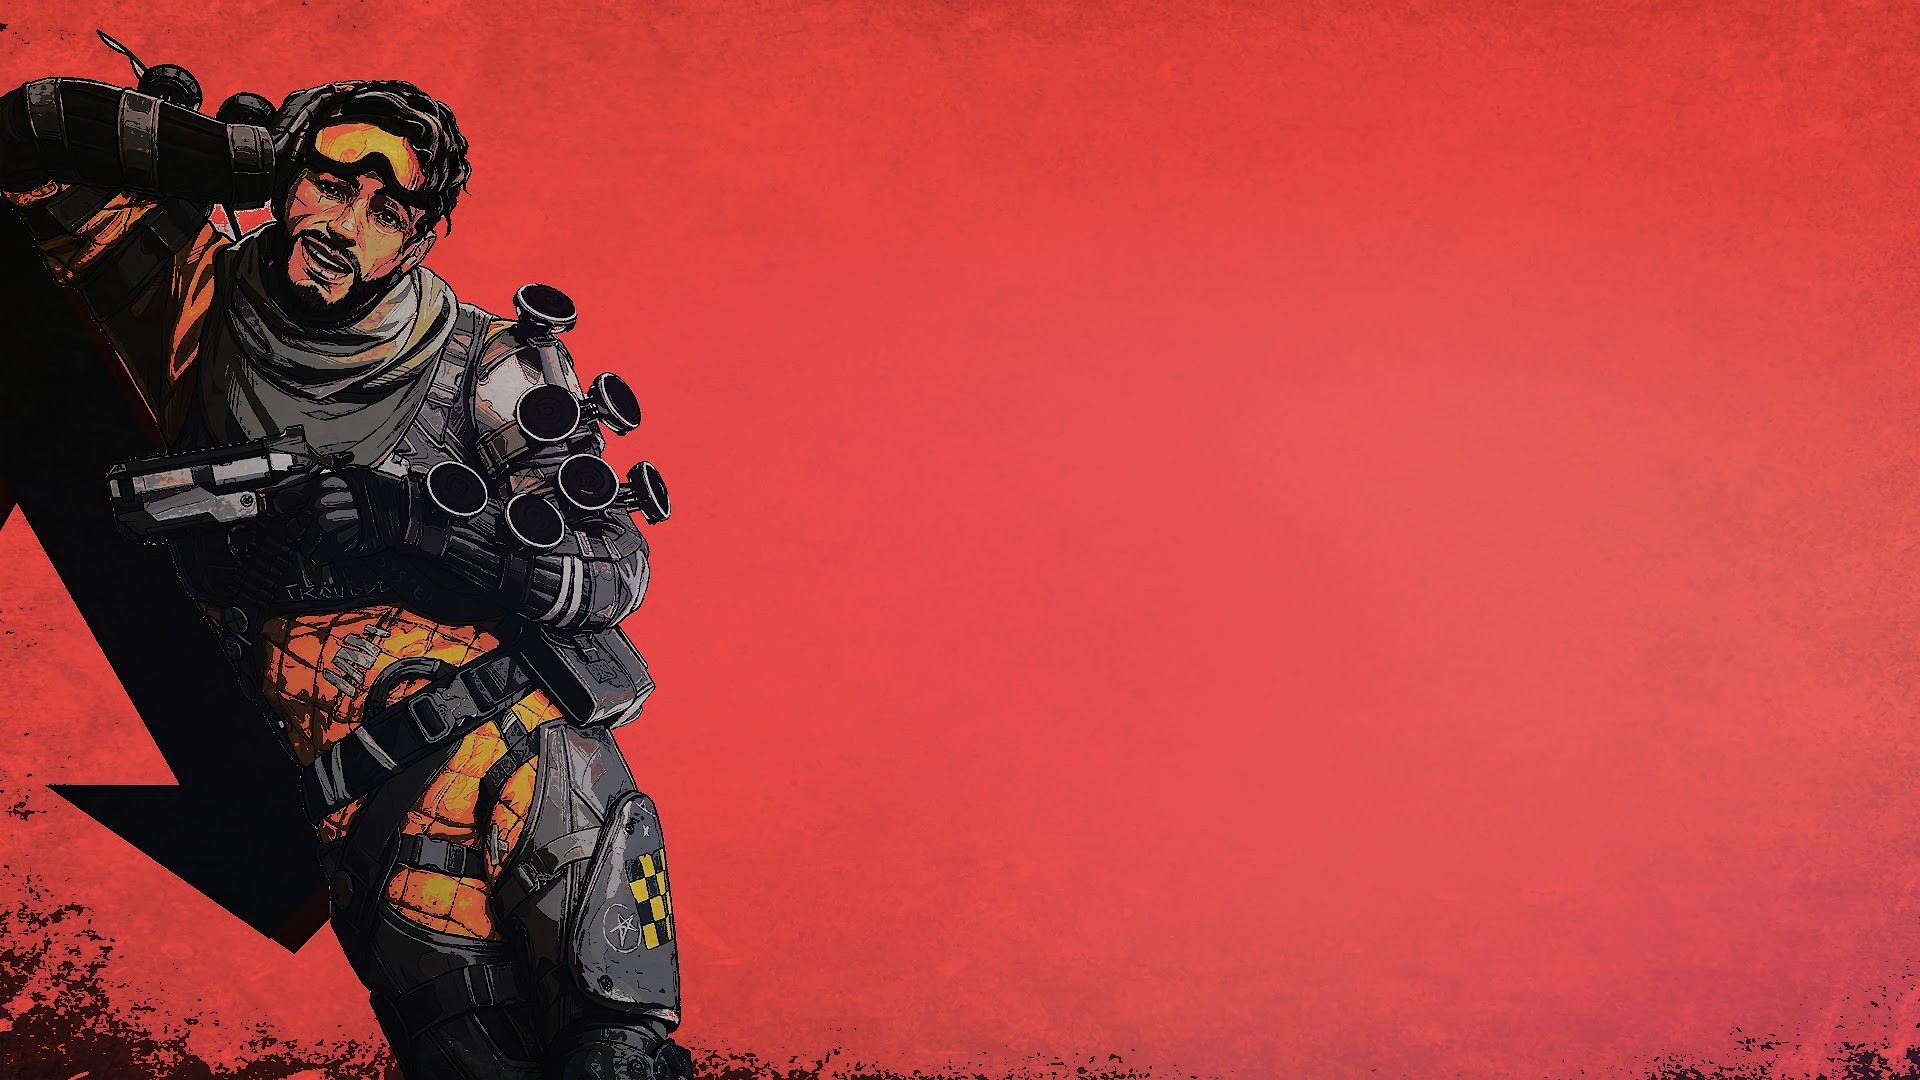 Featured image of post Apex Legends Wallpaper Mirage Wallpaper 4k apex legends bloodhound wraith lifeline hd apex legends 4k wallpaper apex legends background hd 4k wallpaper apex legends characters wallpaper hd 4k apex legends wallpaper